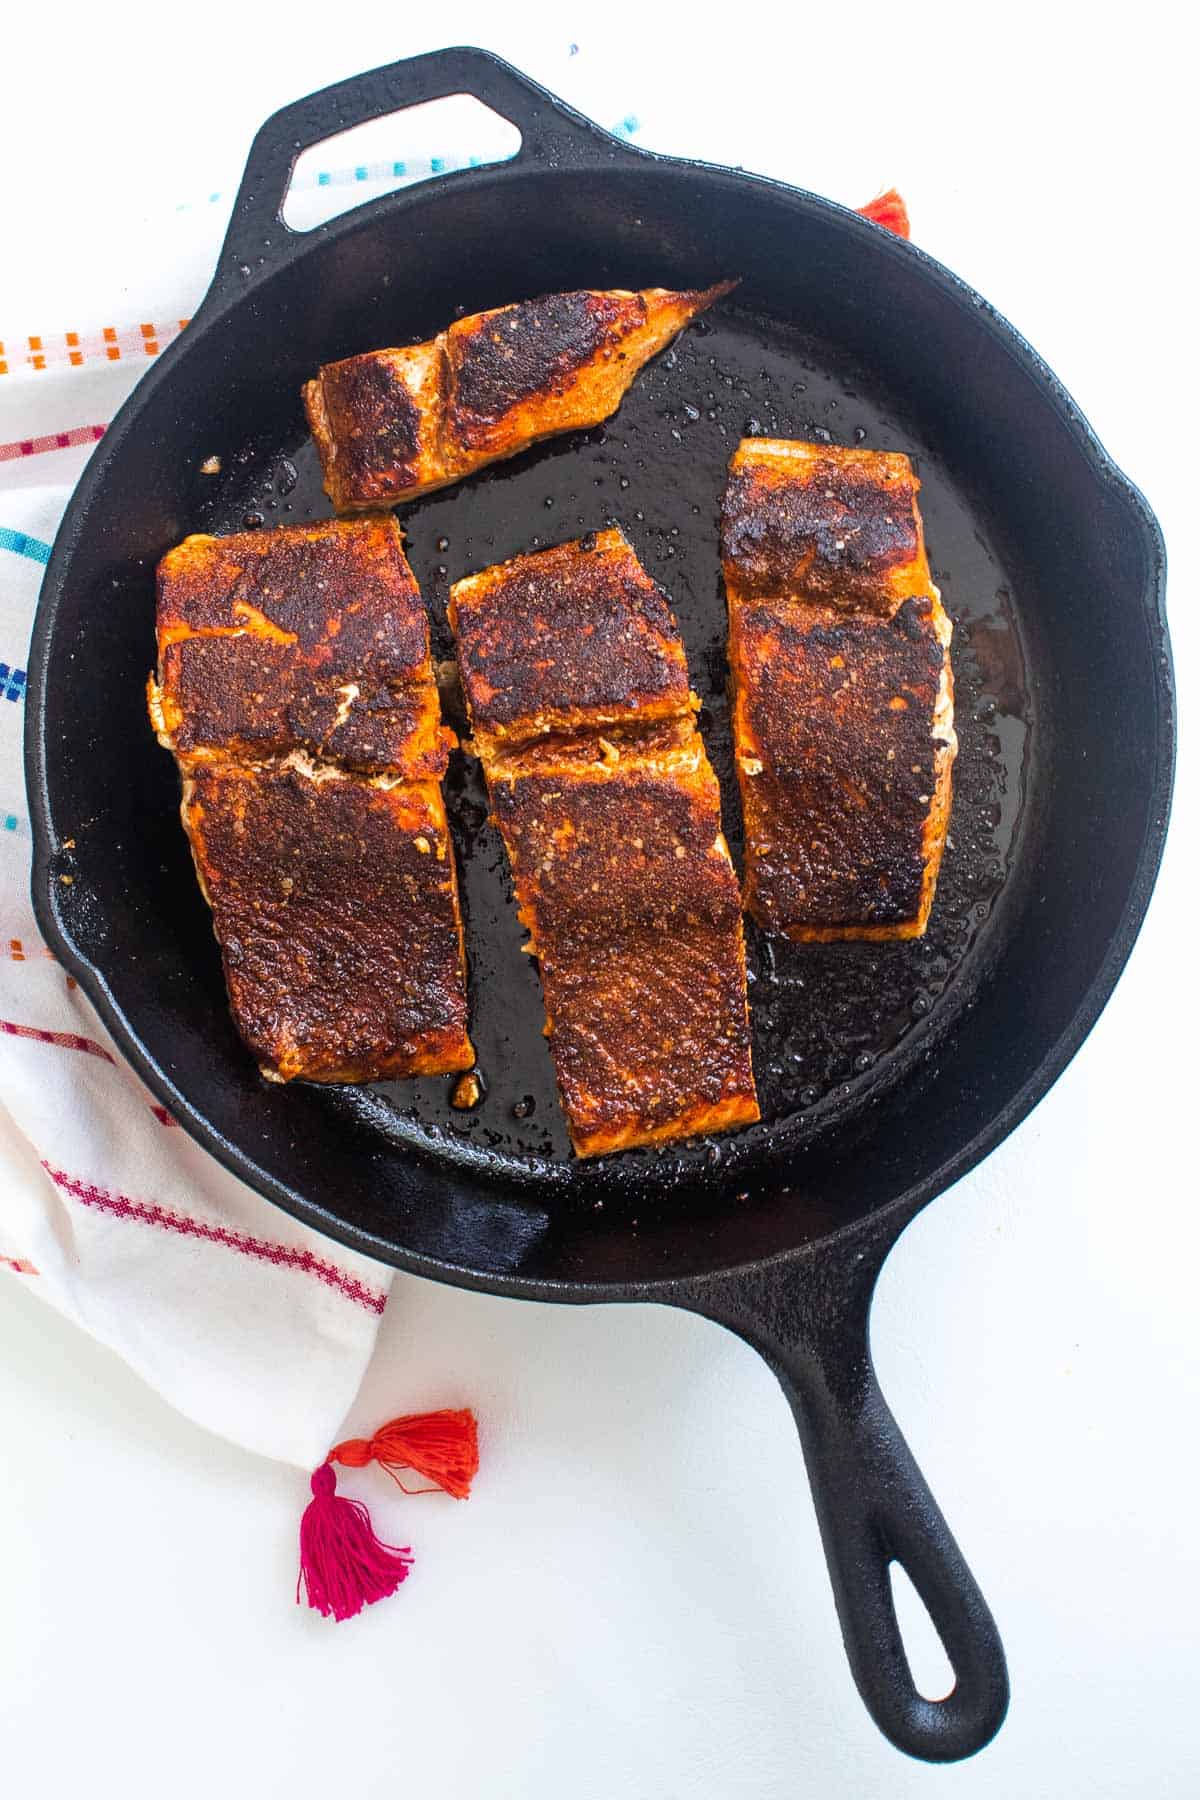 Four seared filets of salmon are cooked in a cast iron skillet.